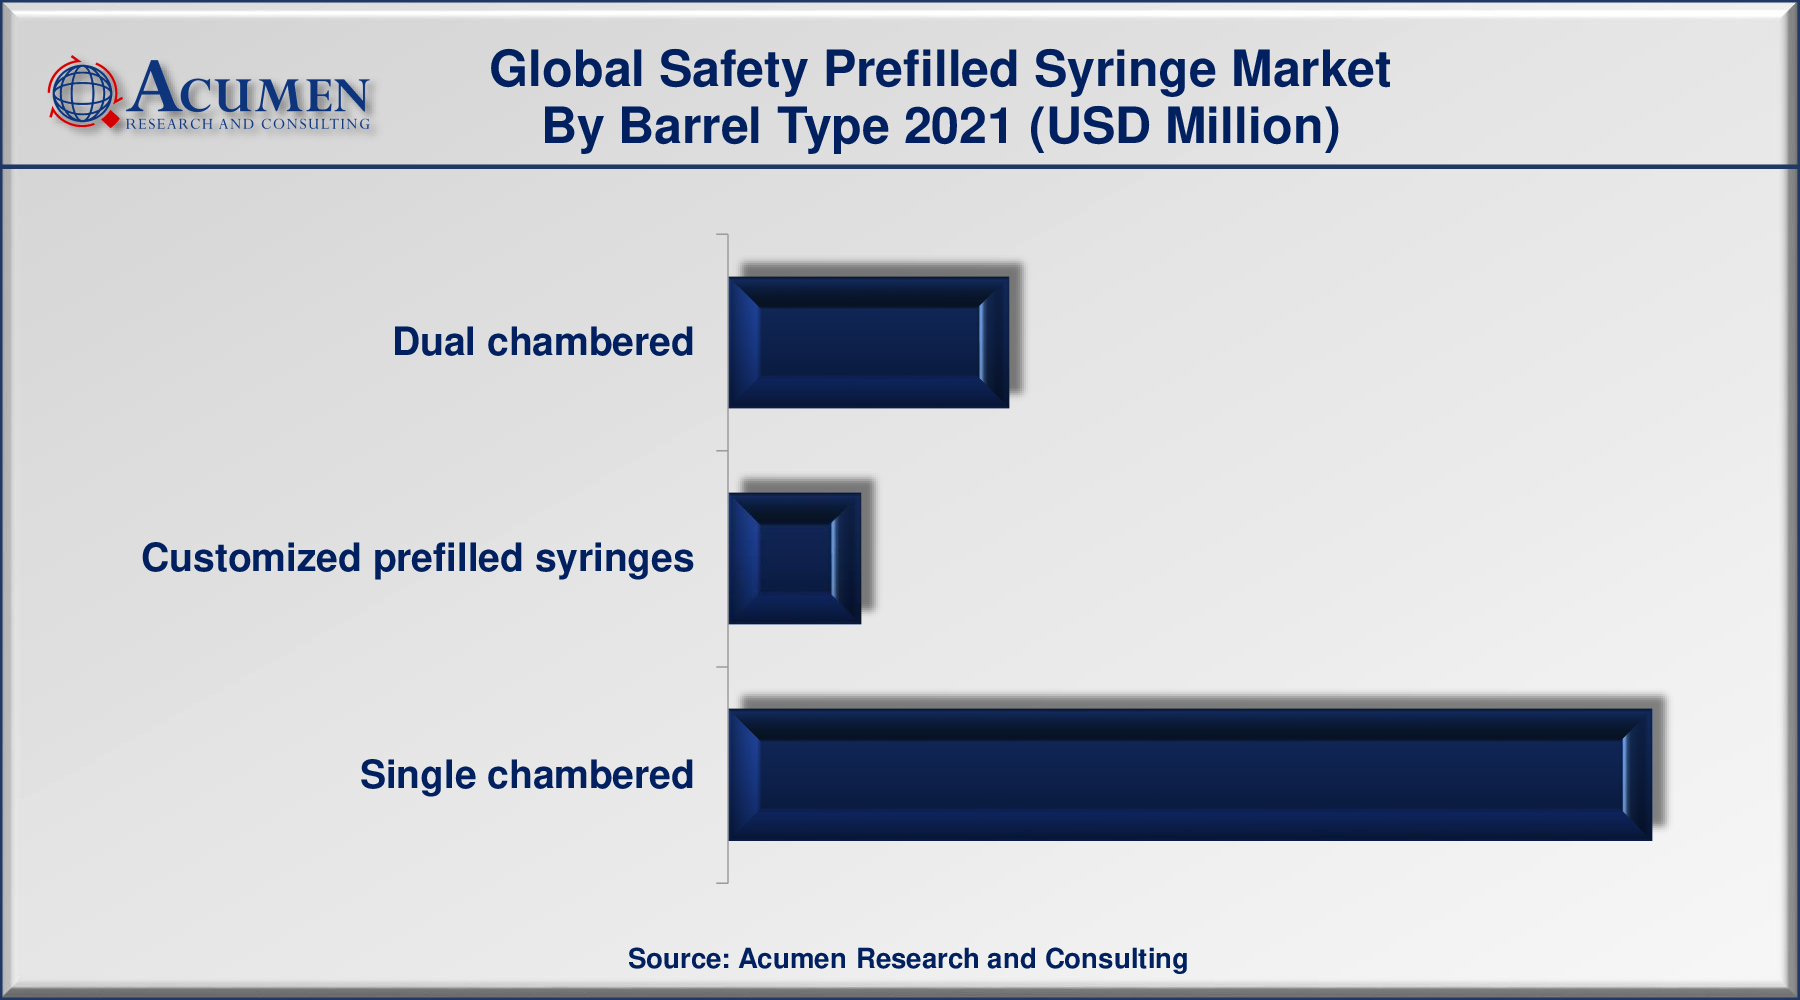 Safety Prefilled Syringe Market Size Accounted for USD 3,591 Million in 2021 and is predicted to be worth USD 6,534 Million by 2030